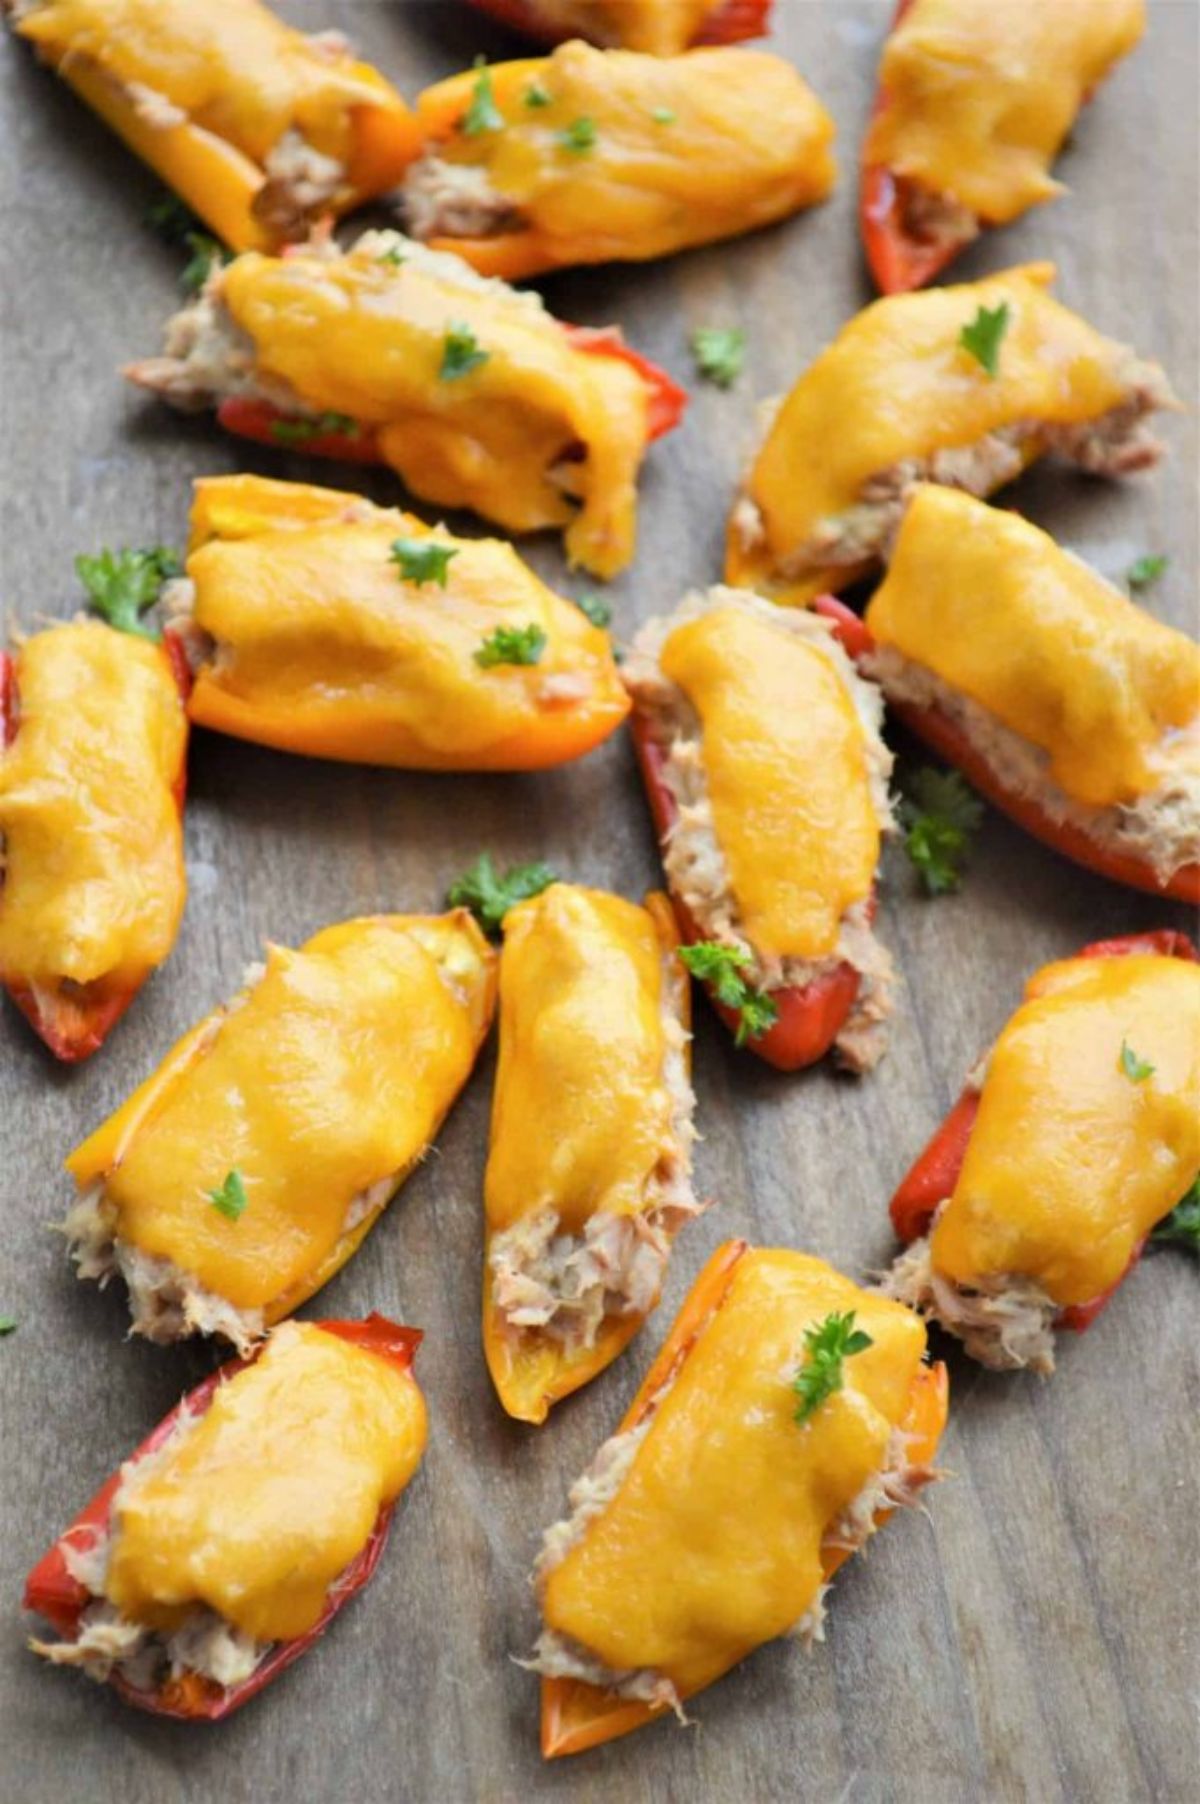 On a wooden table are several cheesy jalapeno poppers.